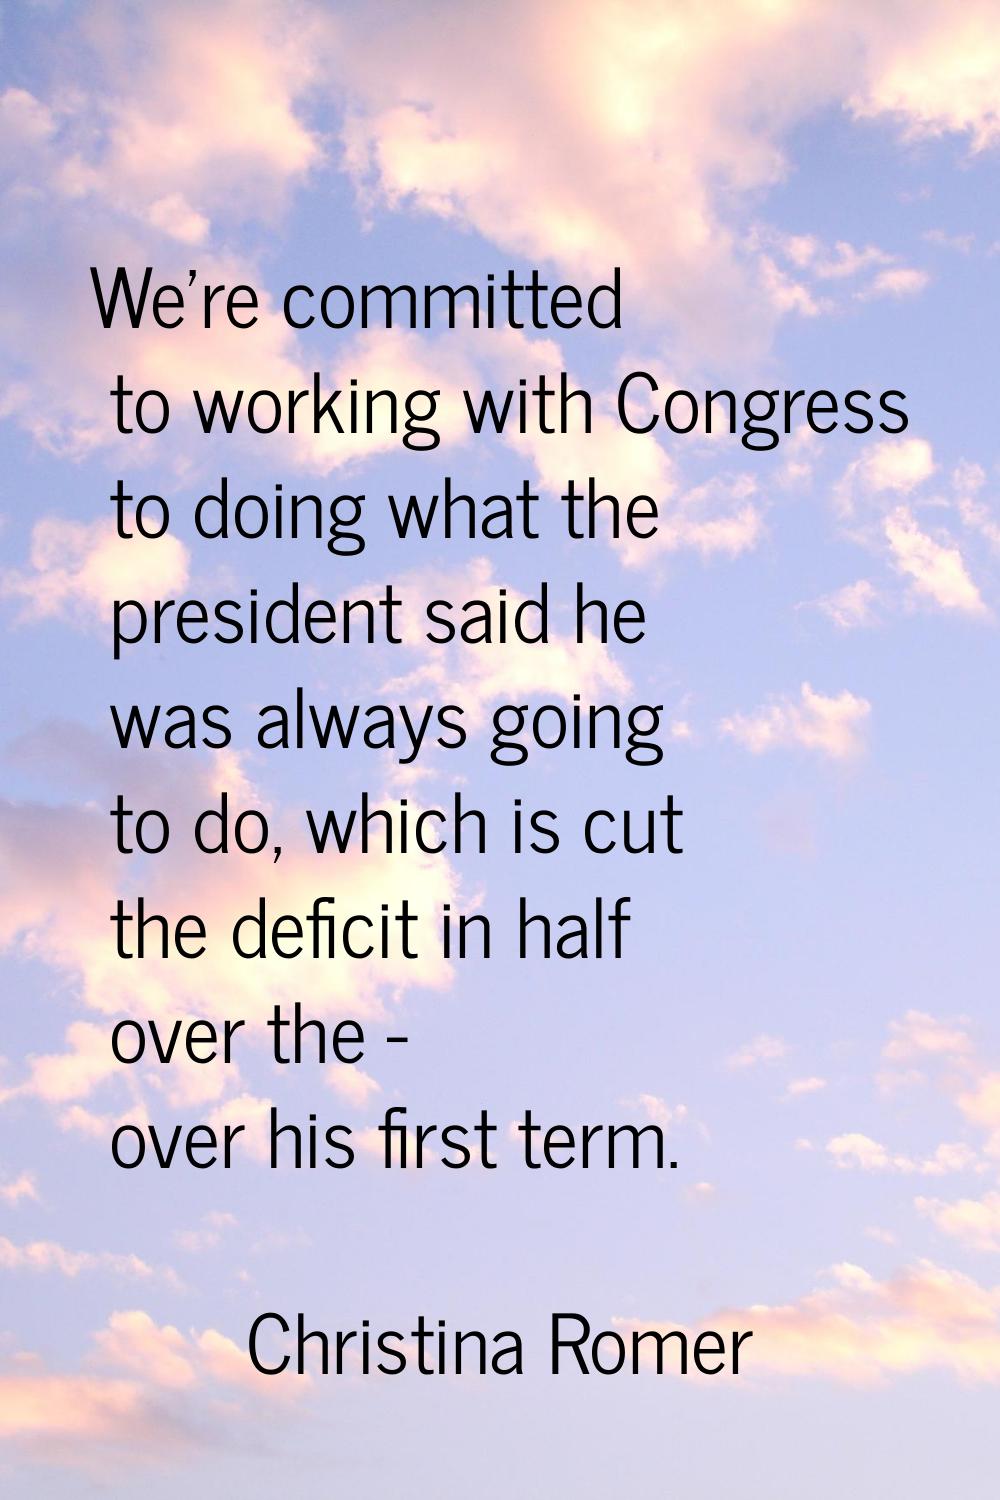 We're committed to working with Congress to doing what the president said he was always going to do